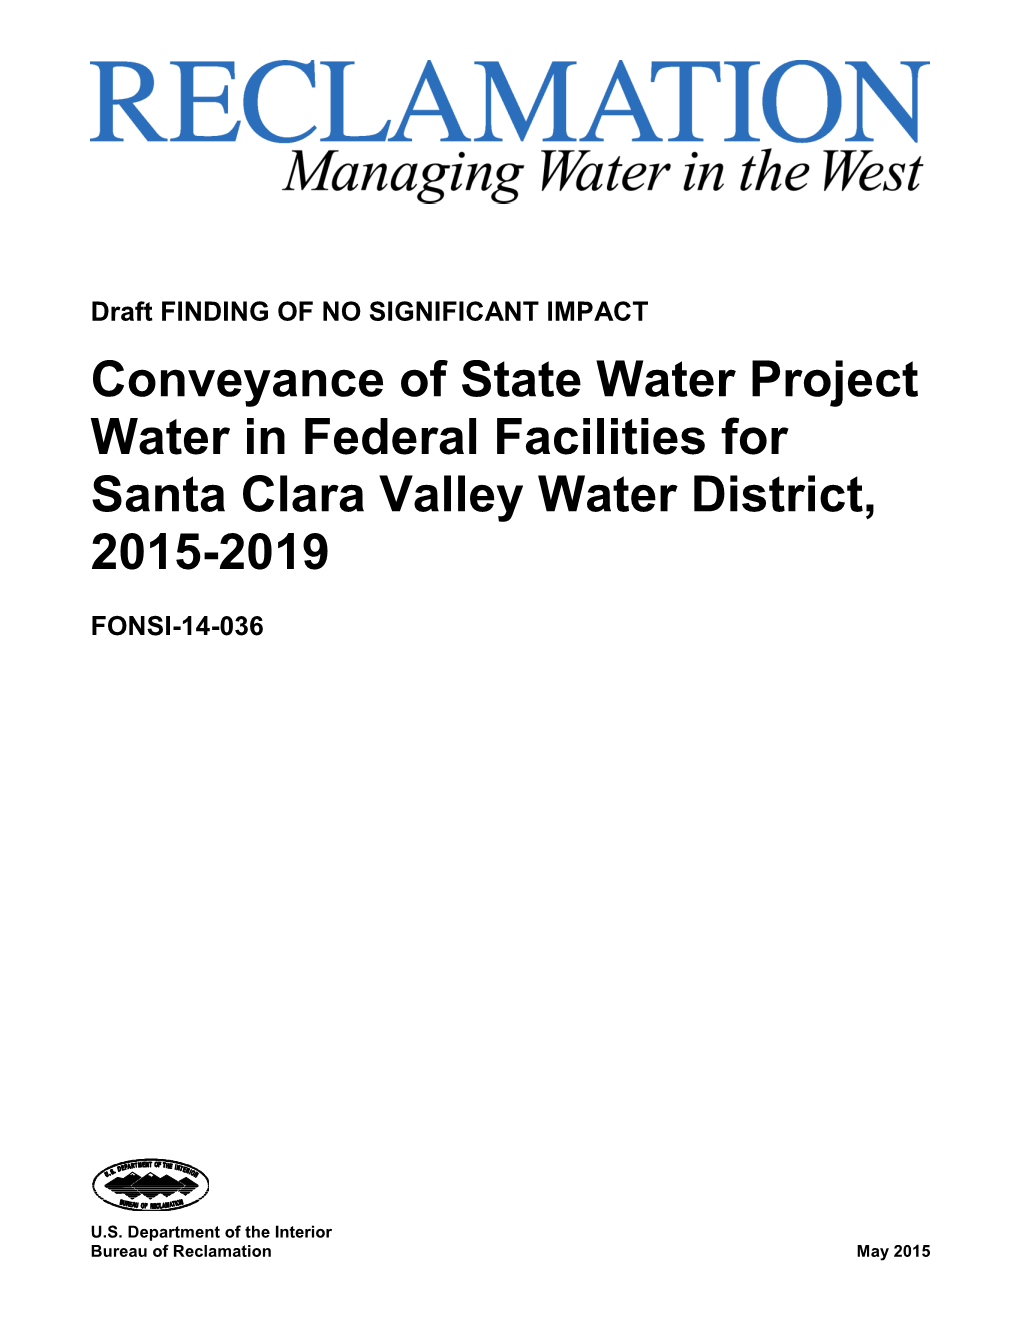 Conveyance of State Water Project Water in Federal Facilities for Santa Clara Valley Water District, 2015-2019